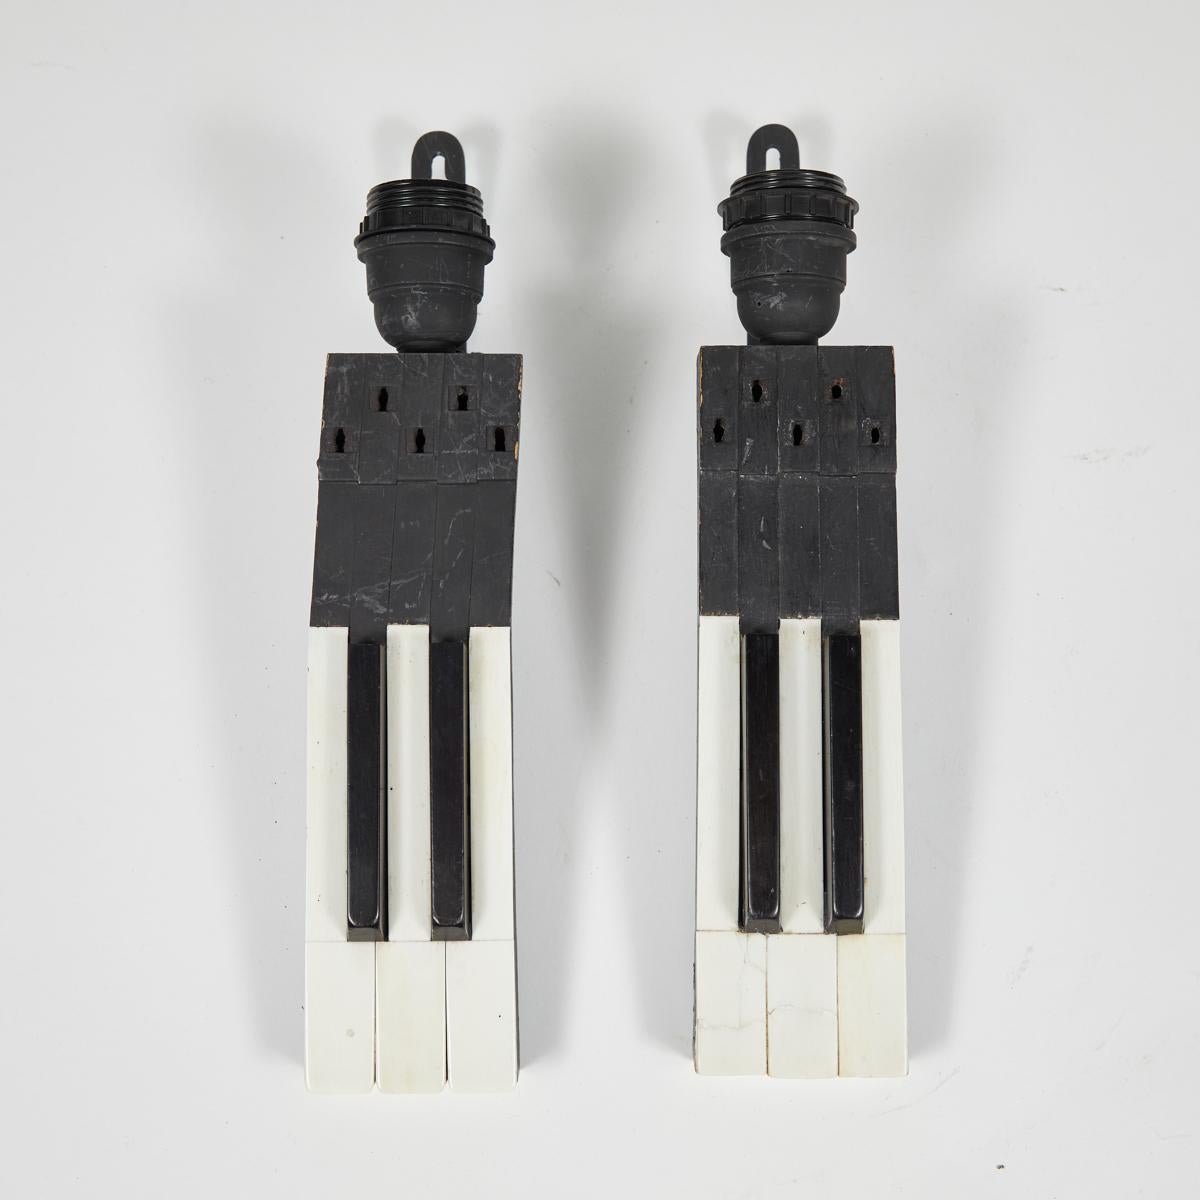 Wood Pair of Sconces Made from Piano Keys from 19th Century, Belgium